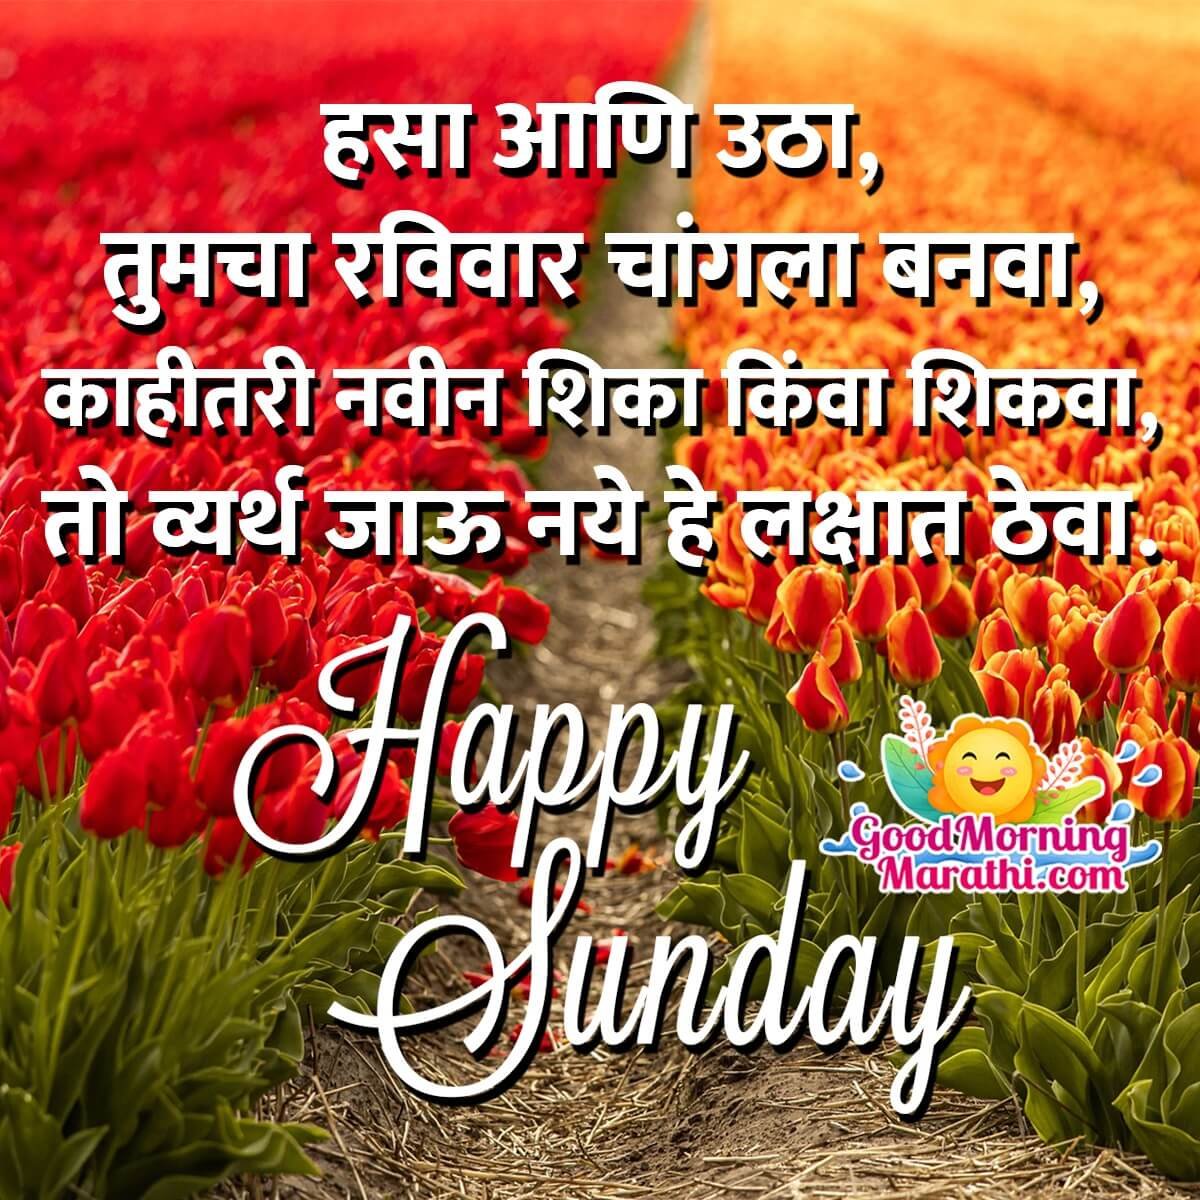 Happy Sunday Good Morning Messages